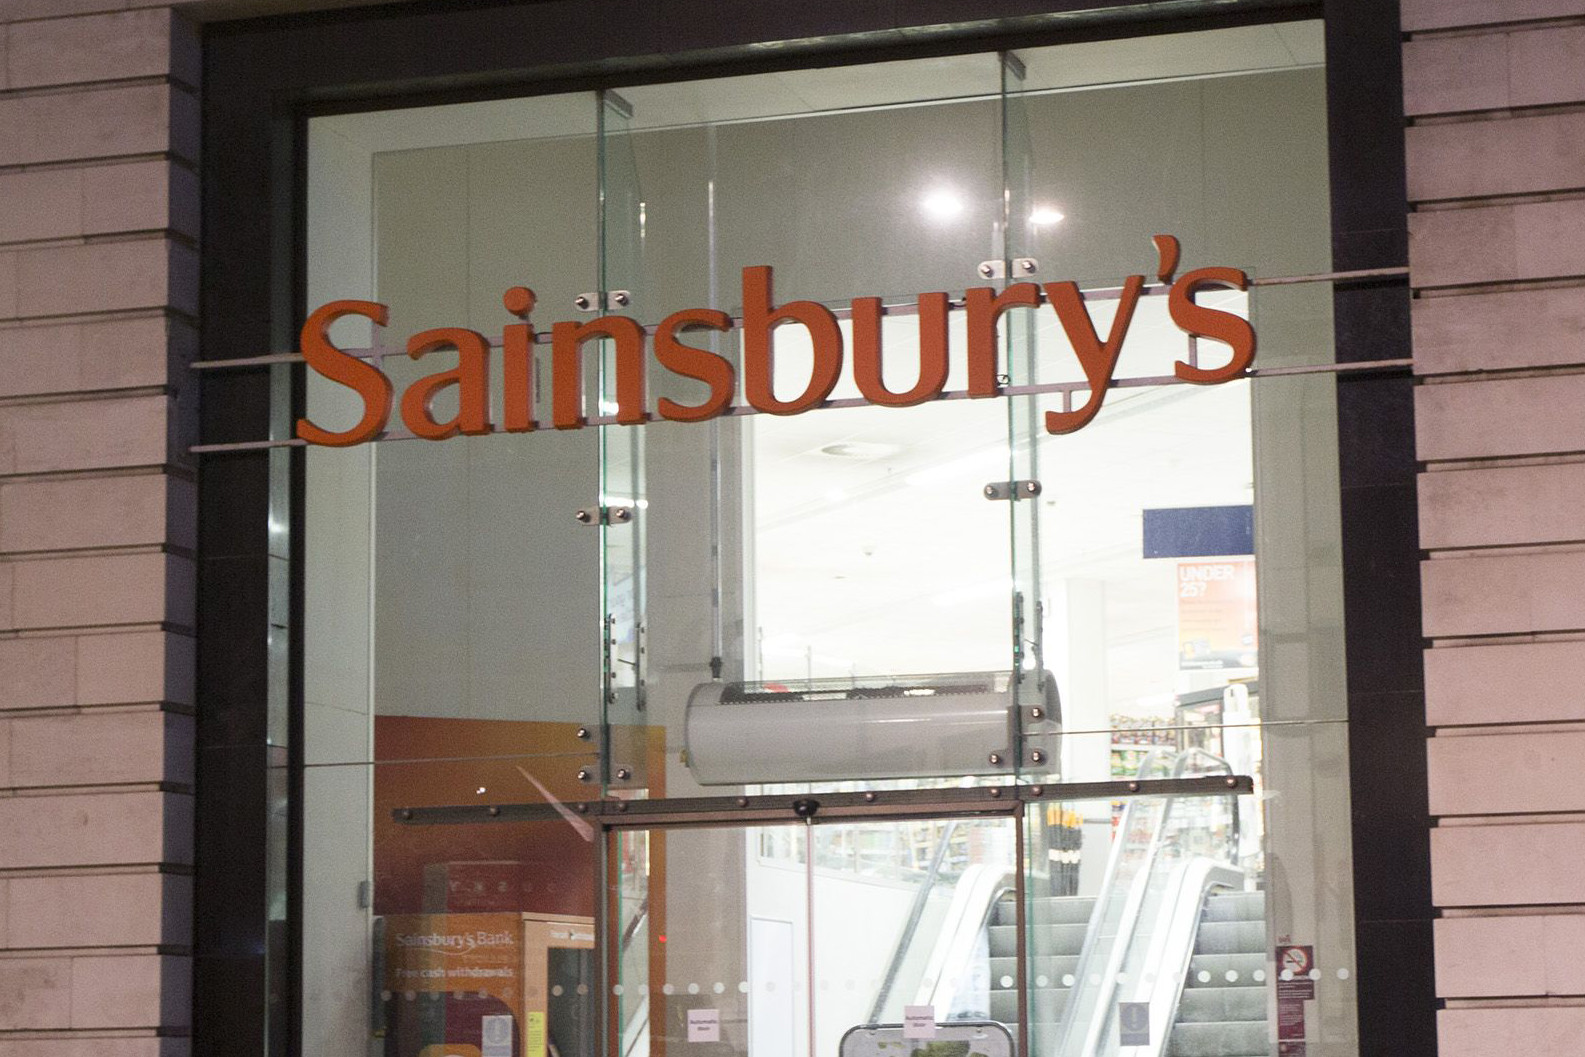 A Sainsbury’s spokesperson: “The way we work with our farmers is different and has been for years. We’ve created a cycle of measuring, managing and continuously improving the health and welfare of our animals, and we believe the results speak for themselves.” Photo: Andrew McCaren/LNP/Rex/Shutterstock